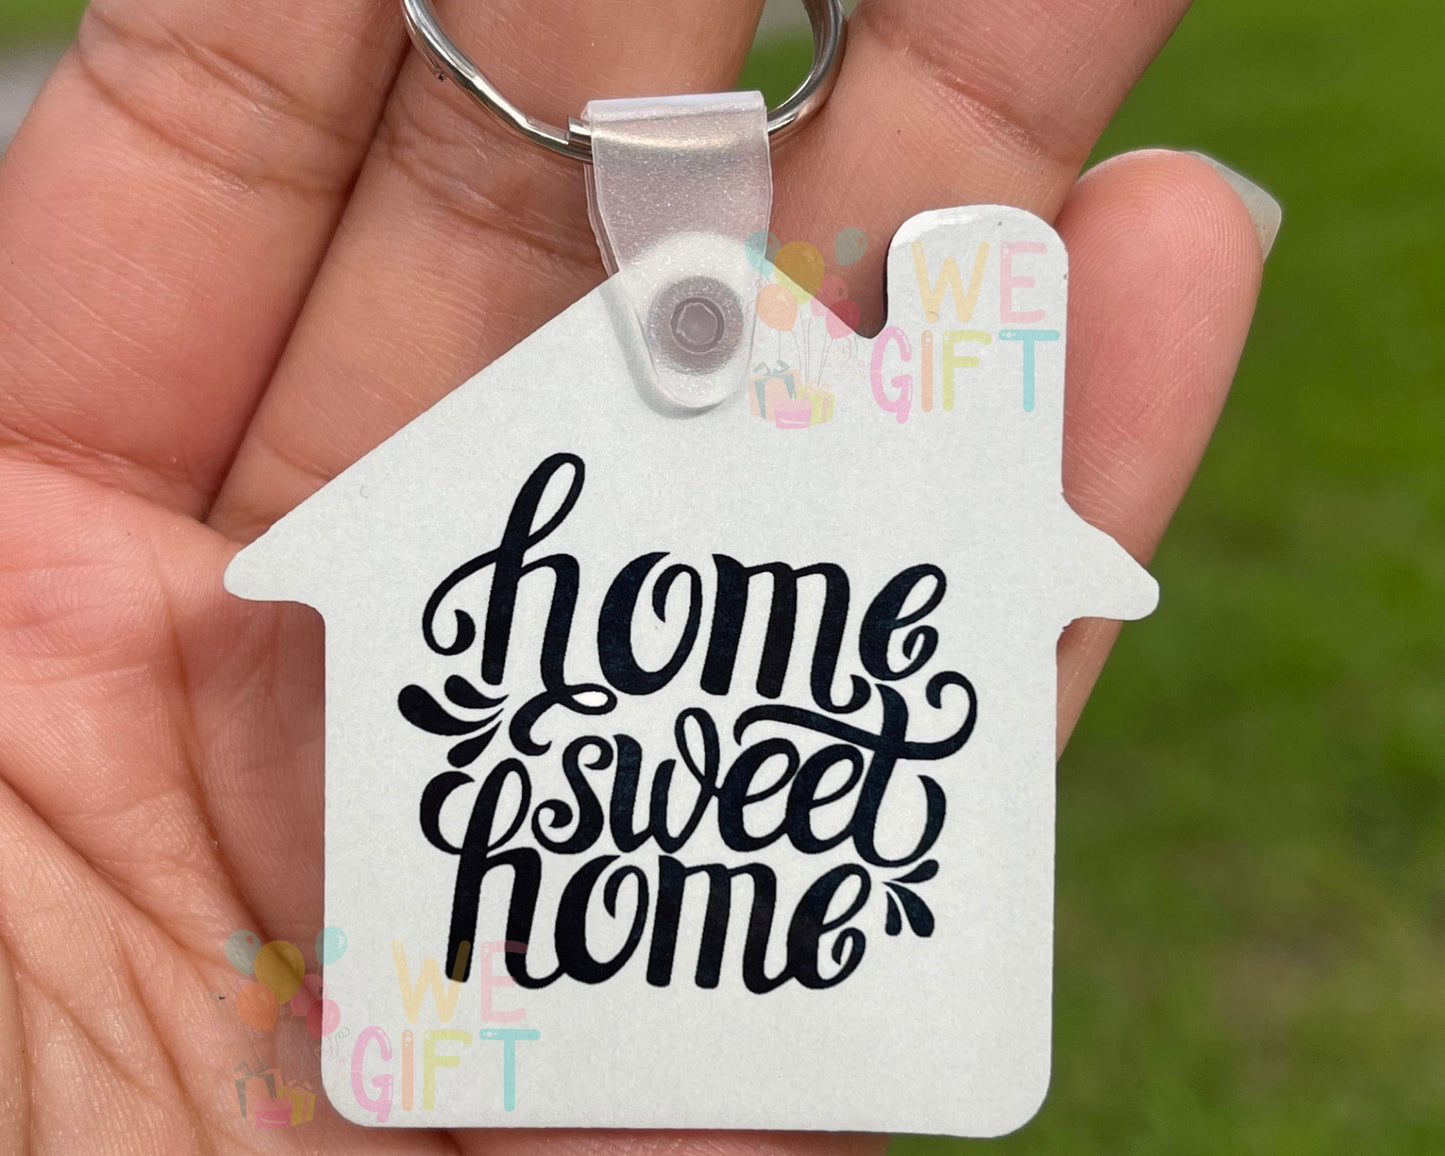 House Shaped Keychain | Realtor Closing Gift | Business Card Keychain | New Home Gift | Waterproof Keychain